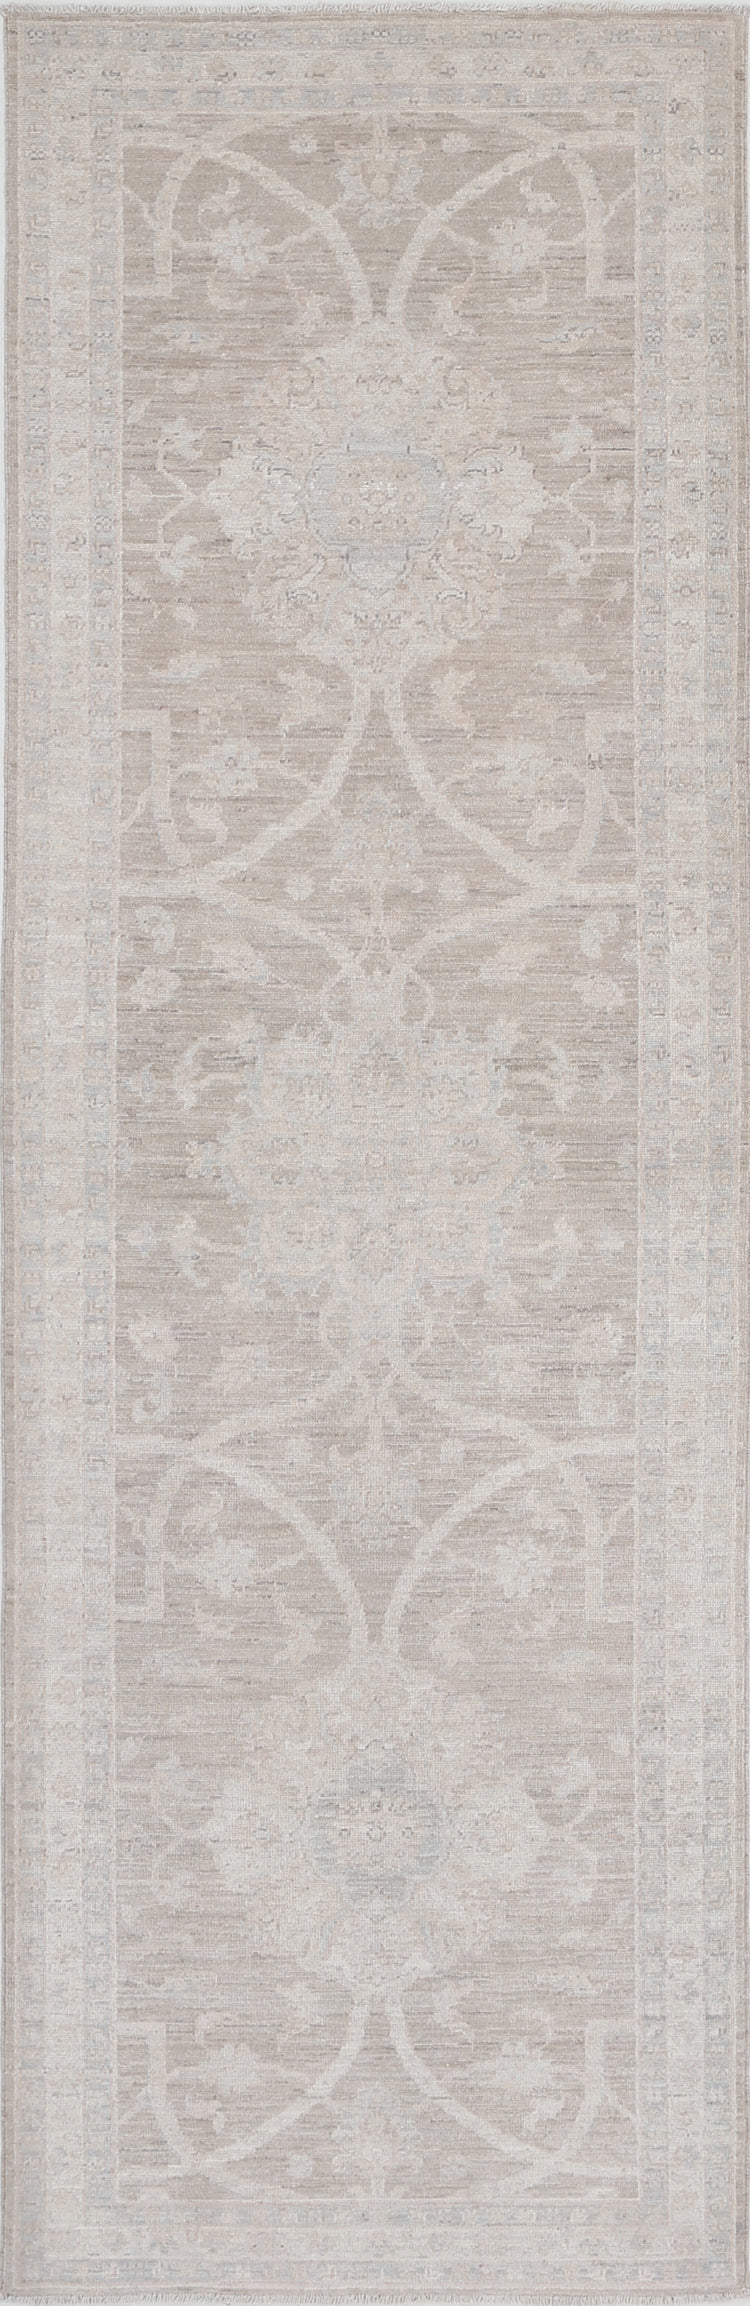 Hand Knotted Serenity Wool Rug - 2'8'' x 8'5''